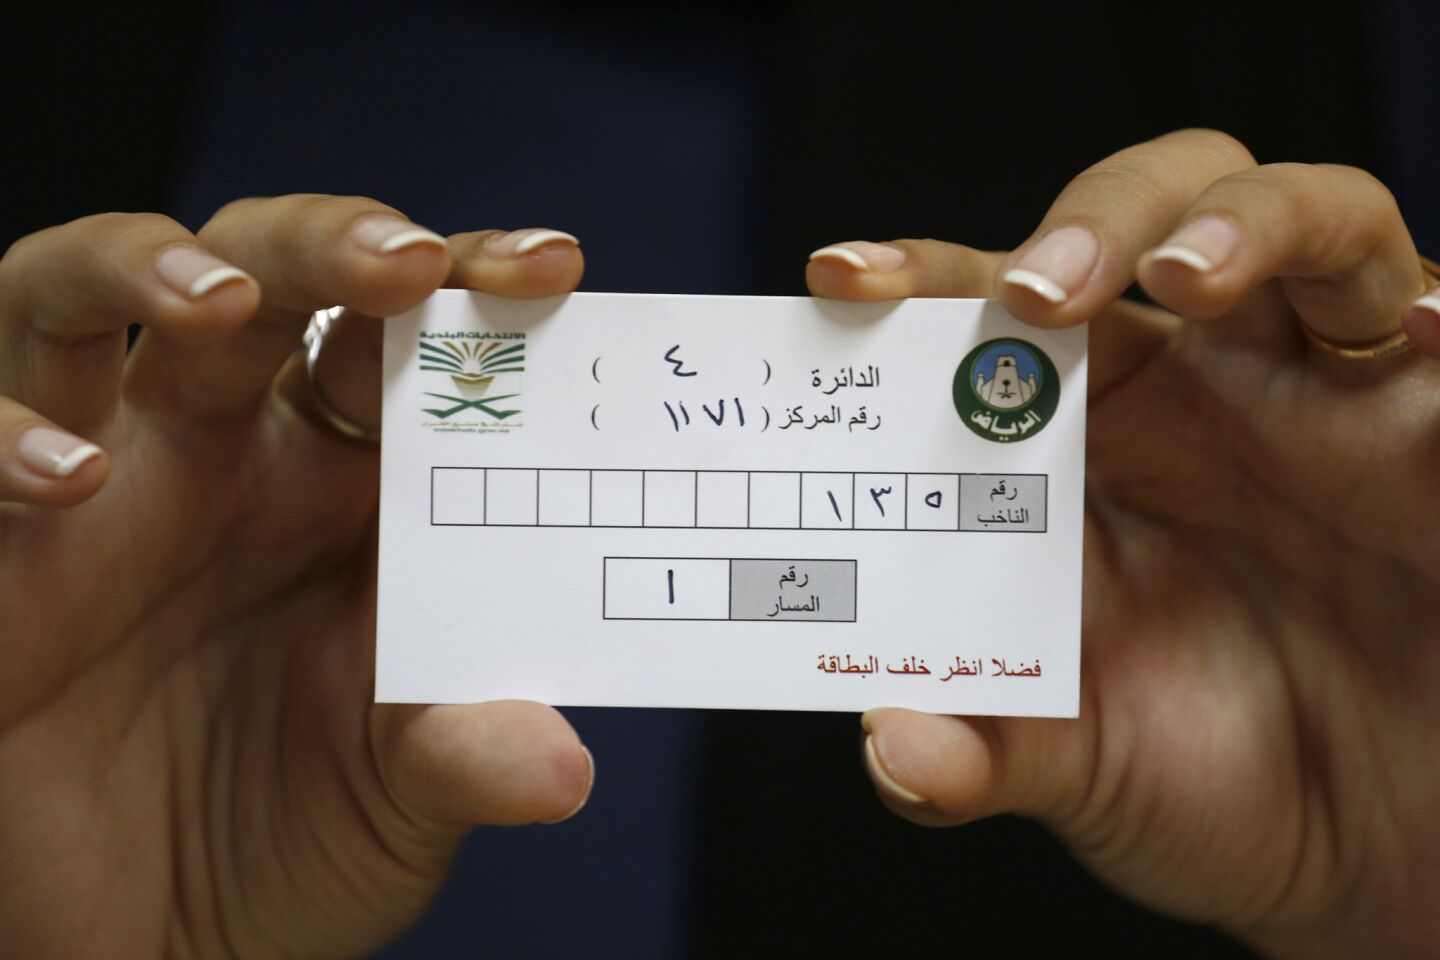 A woman proudly holds her voter identification card at a polling station in Riyadh. Of the 1.5 million registered voters in Saudi Arabia, only 130,000 are women.